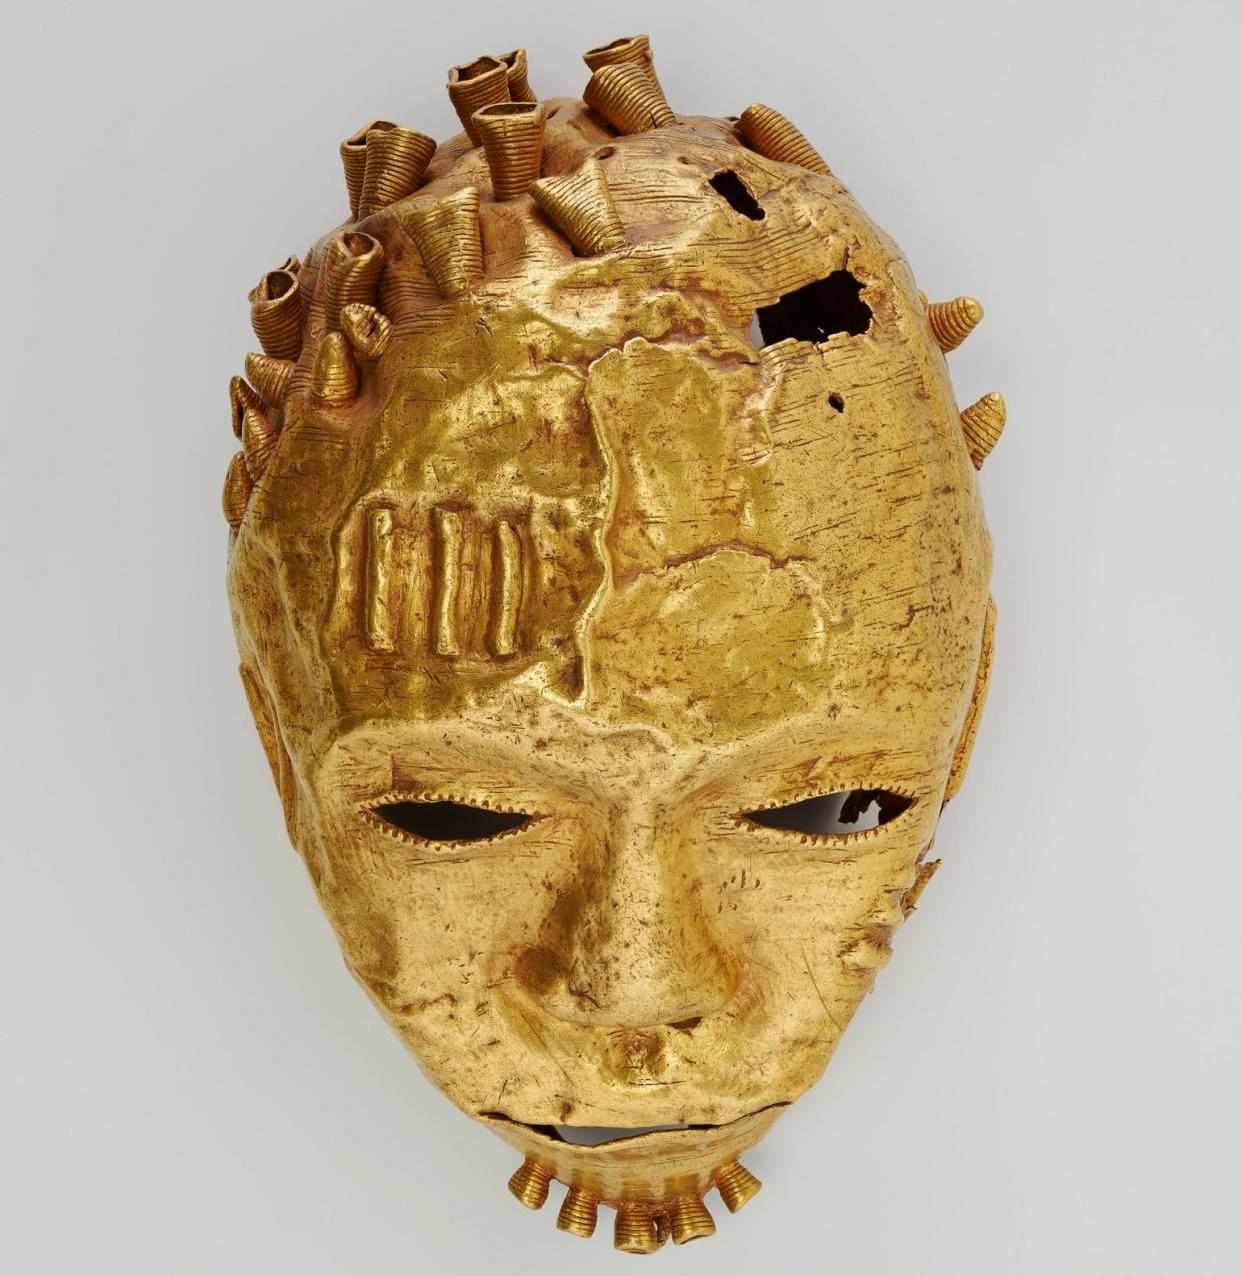 One of the artefacts which the Asante want repatriated is a golden trophy head taken from King Kofi Karikari, currently on display at Windsor Castle as part of the Royal Collection